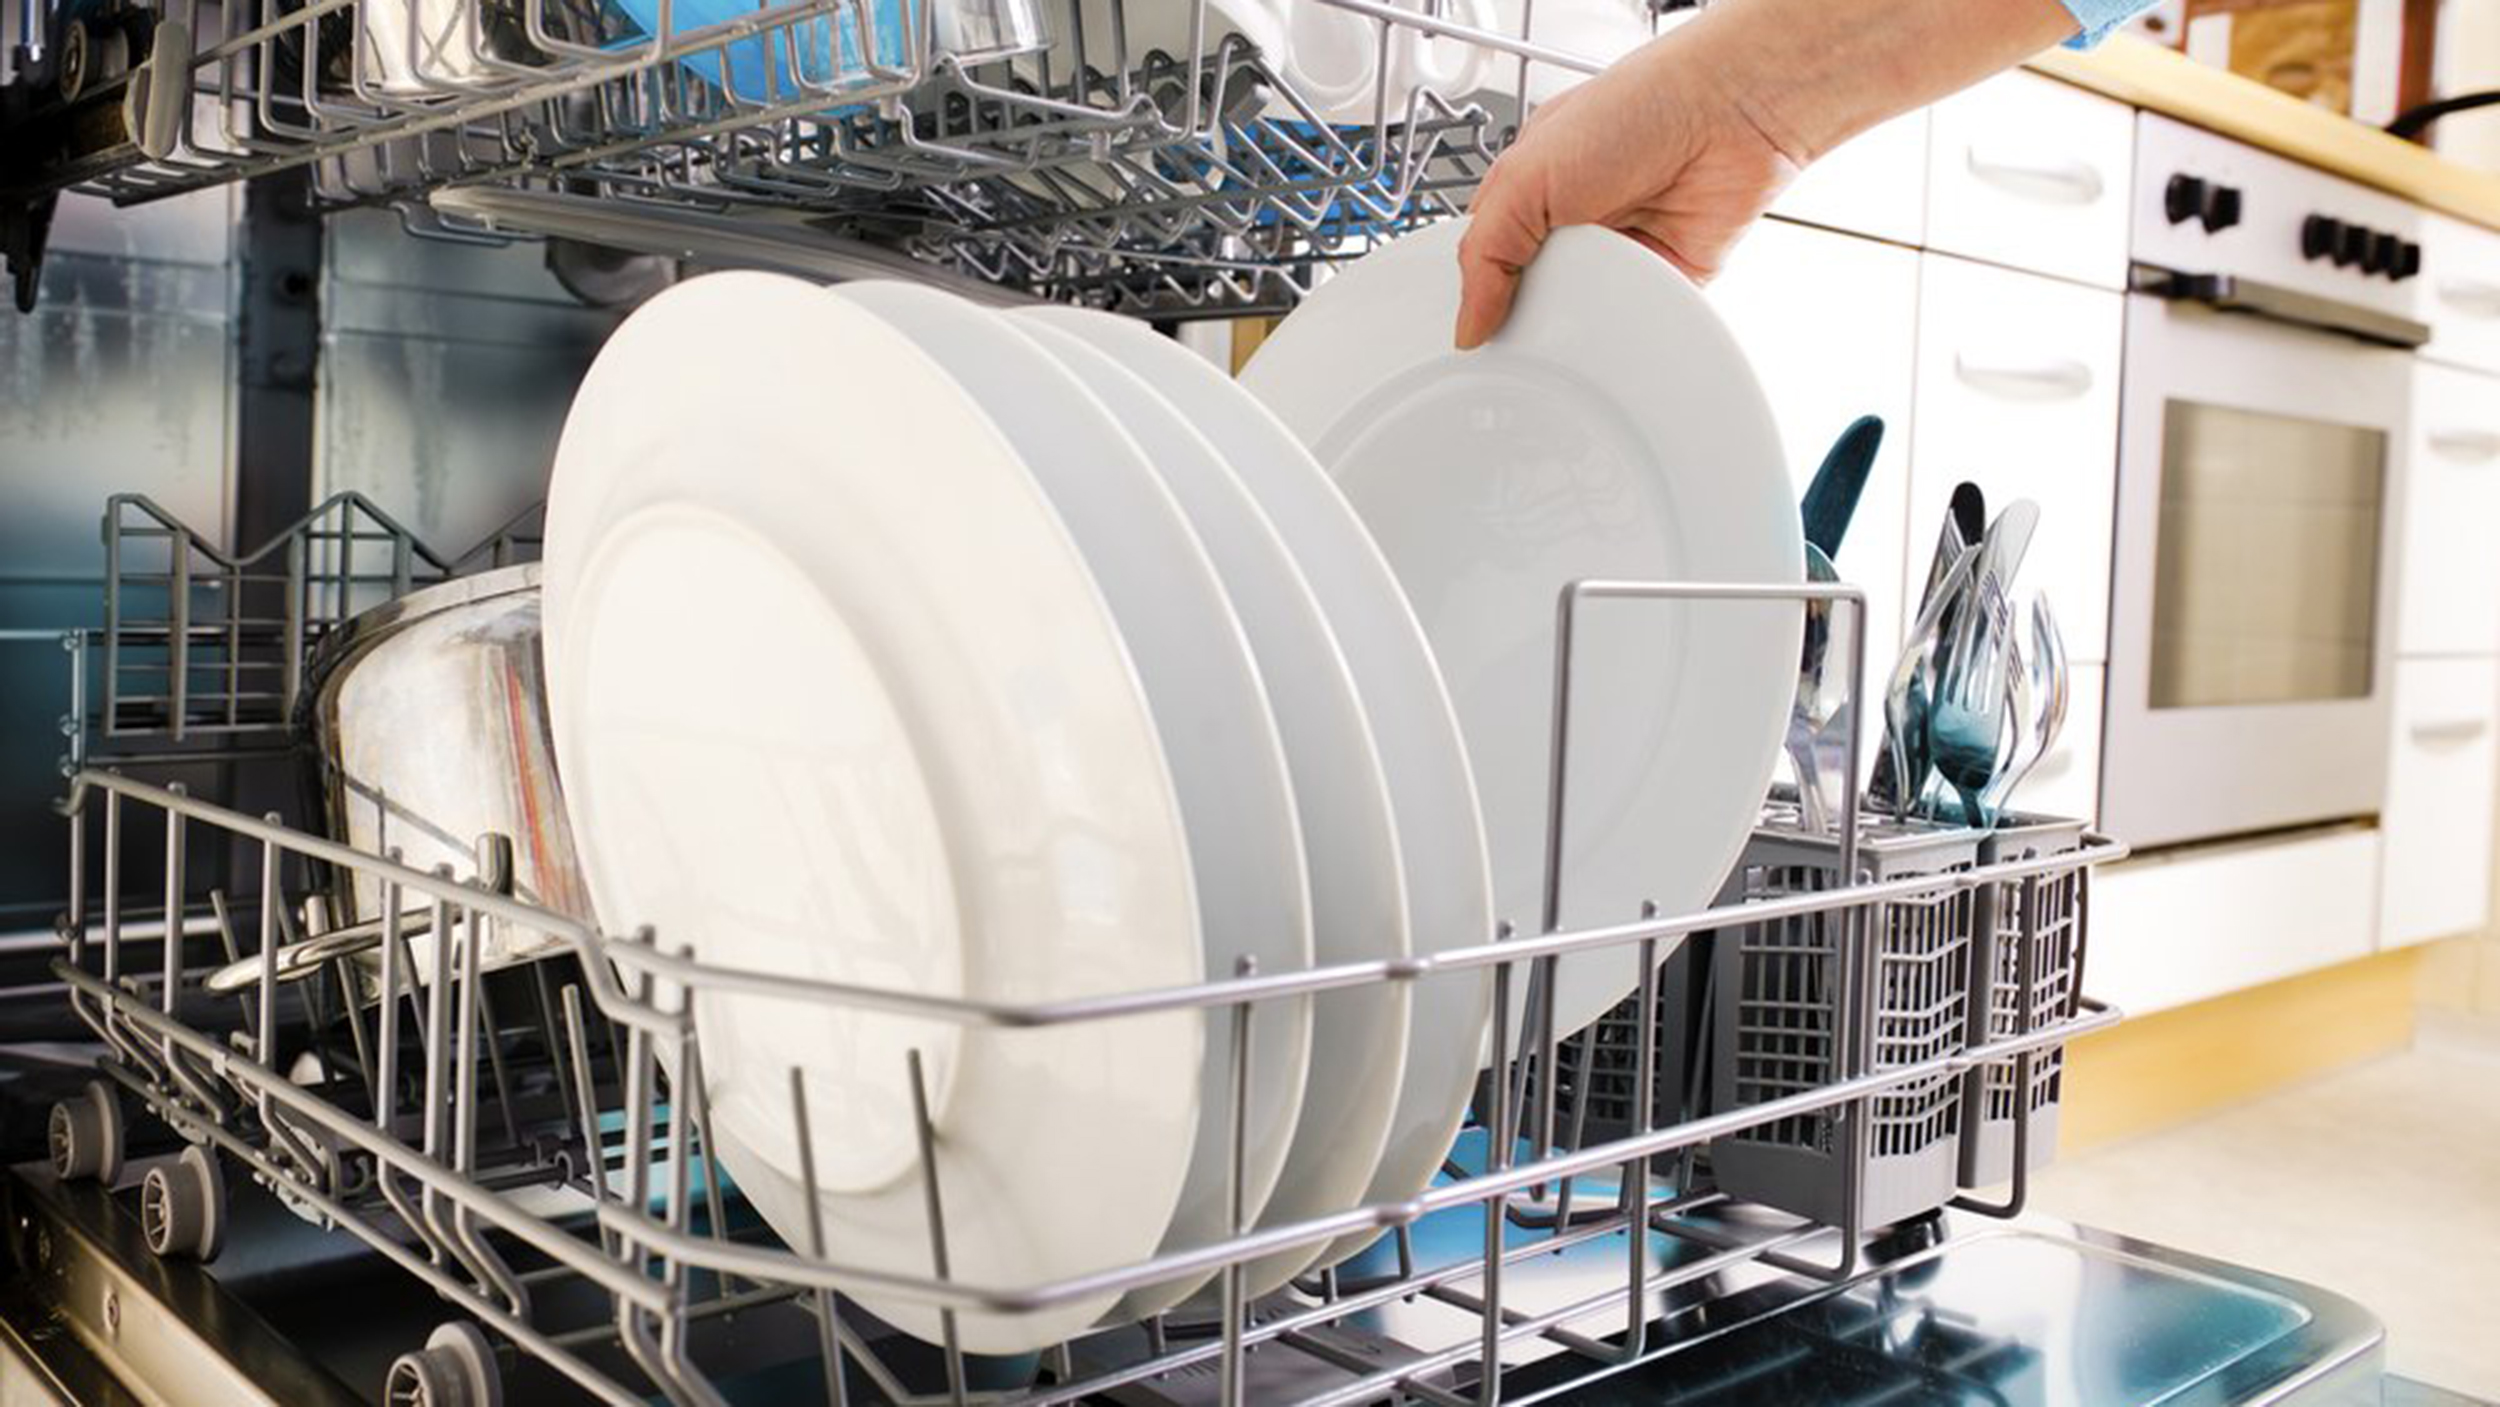 4 Reasons for Dishwasher Clogs